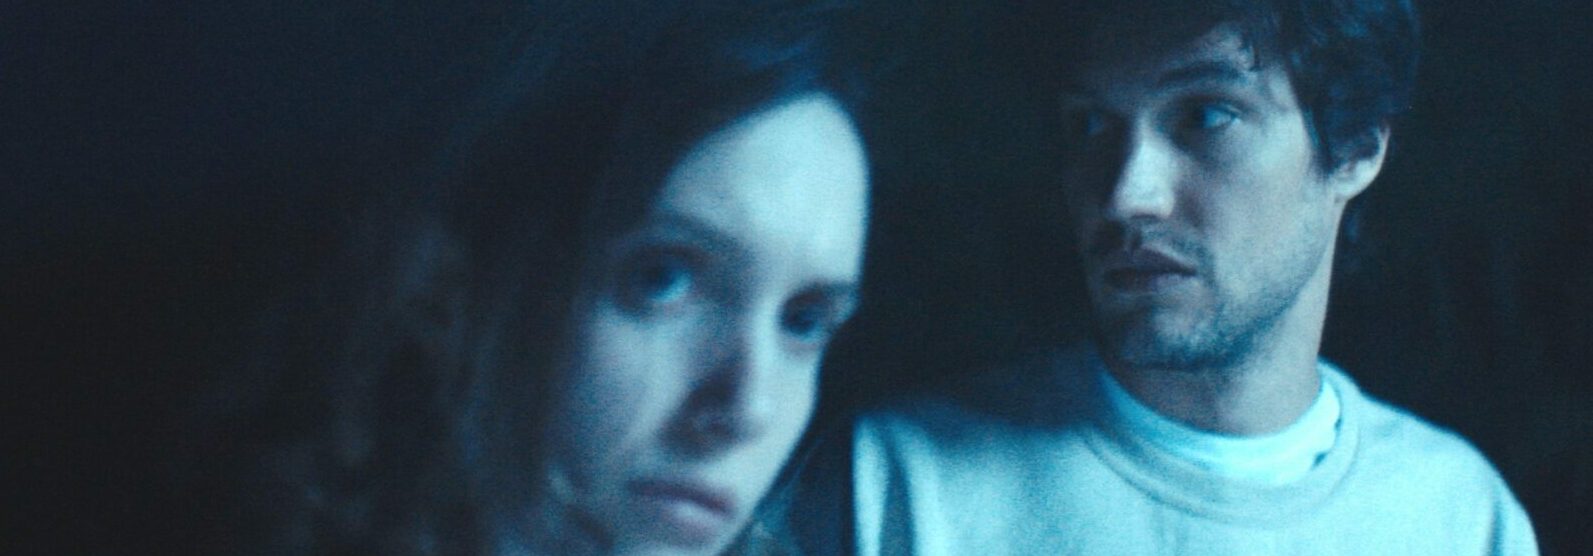 A still from Robert McMahon's film showing two people in close up bathed in a blue light with black bacgkround.